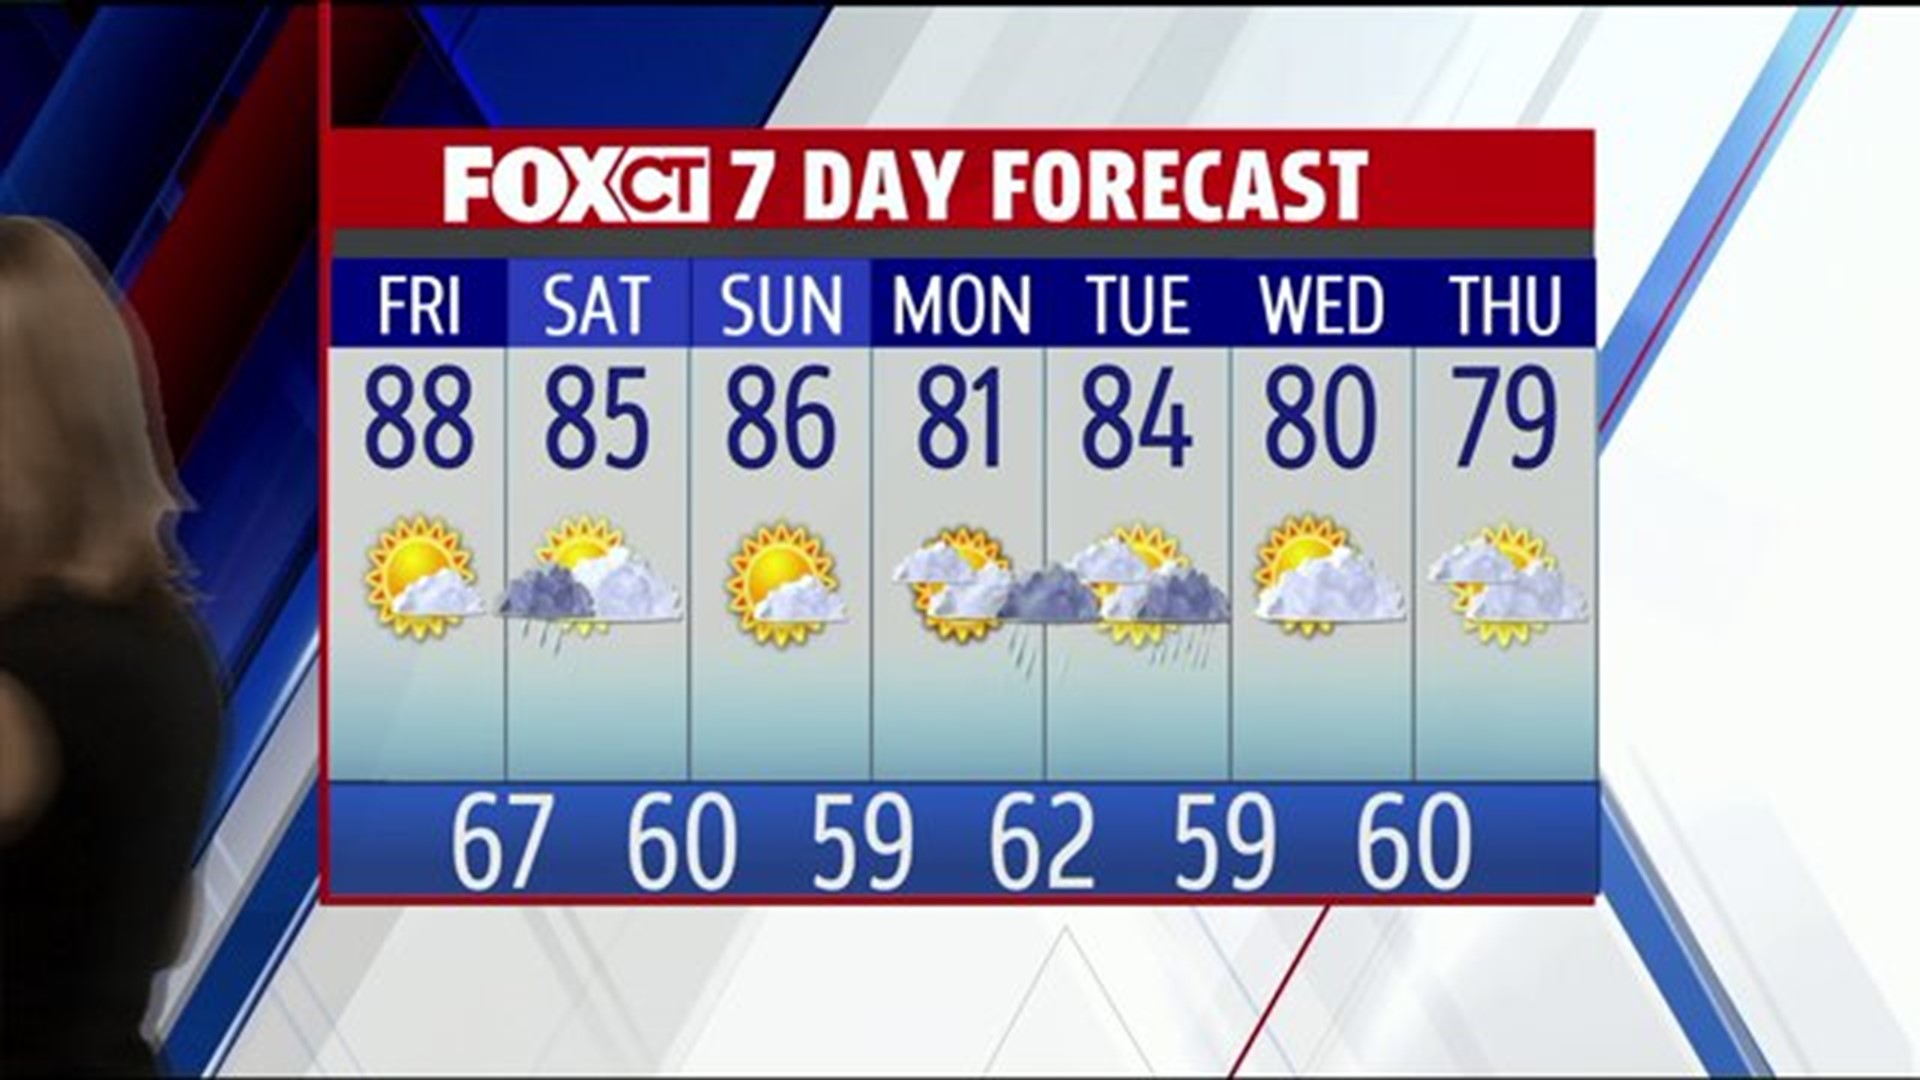 Humidity very high as possible showers approach, temperatures stay way above normal